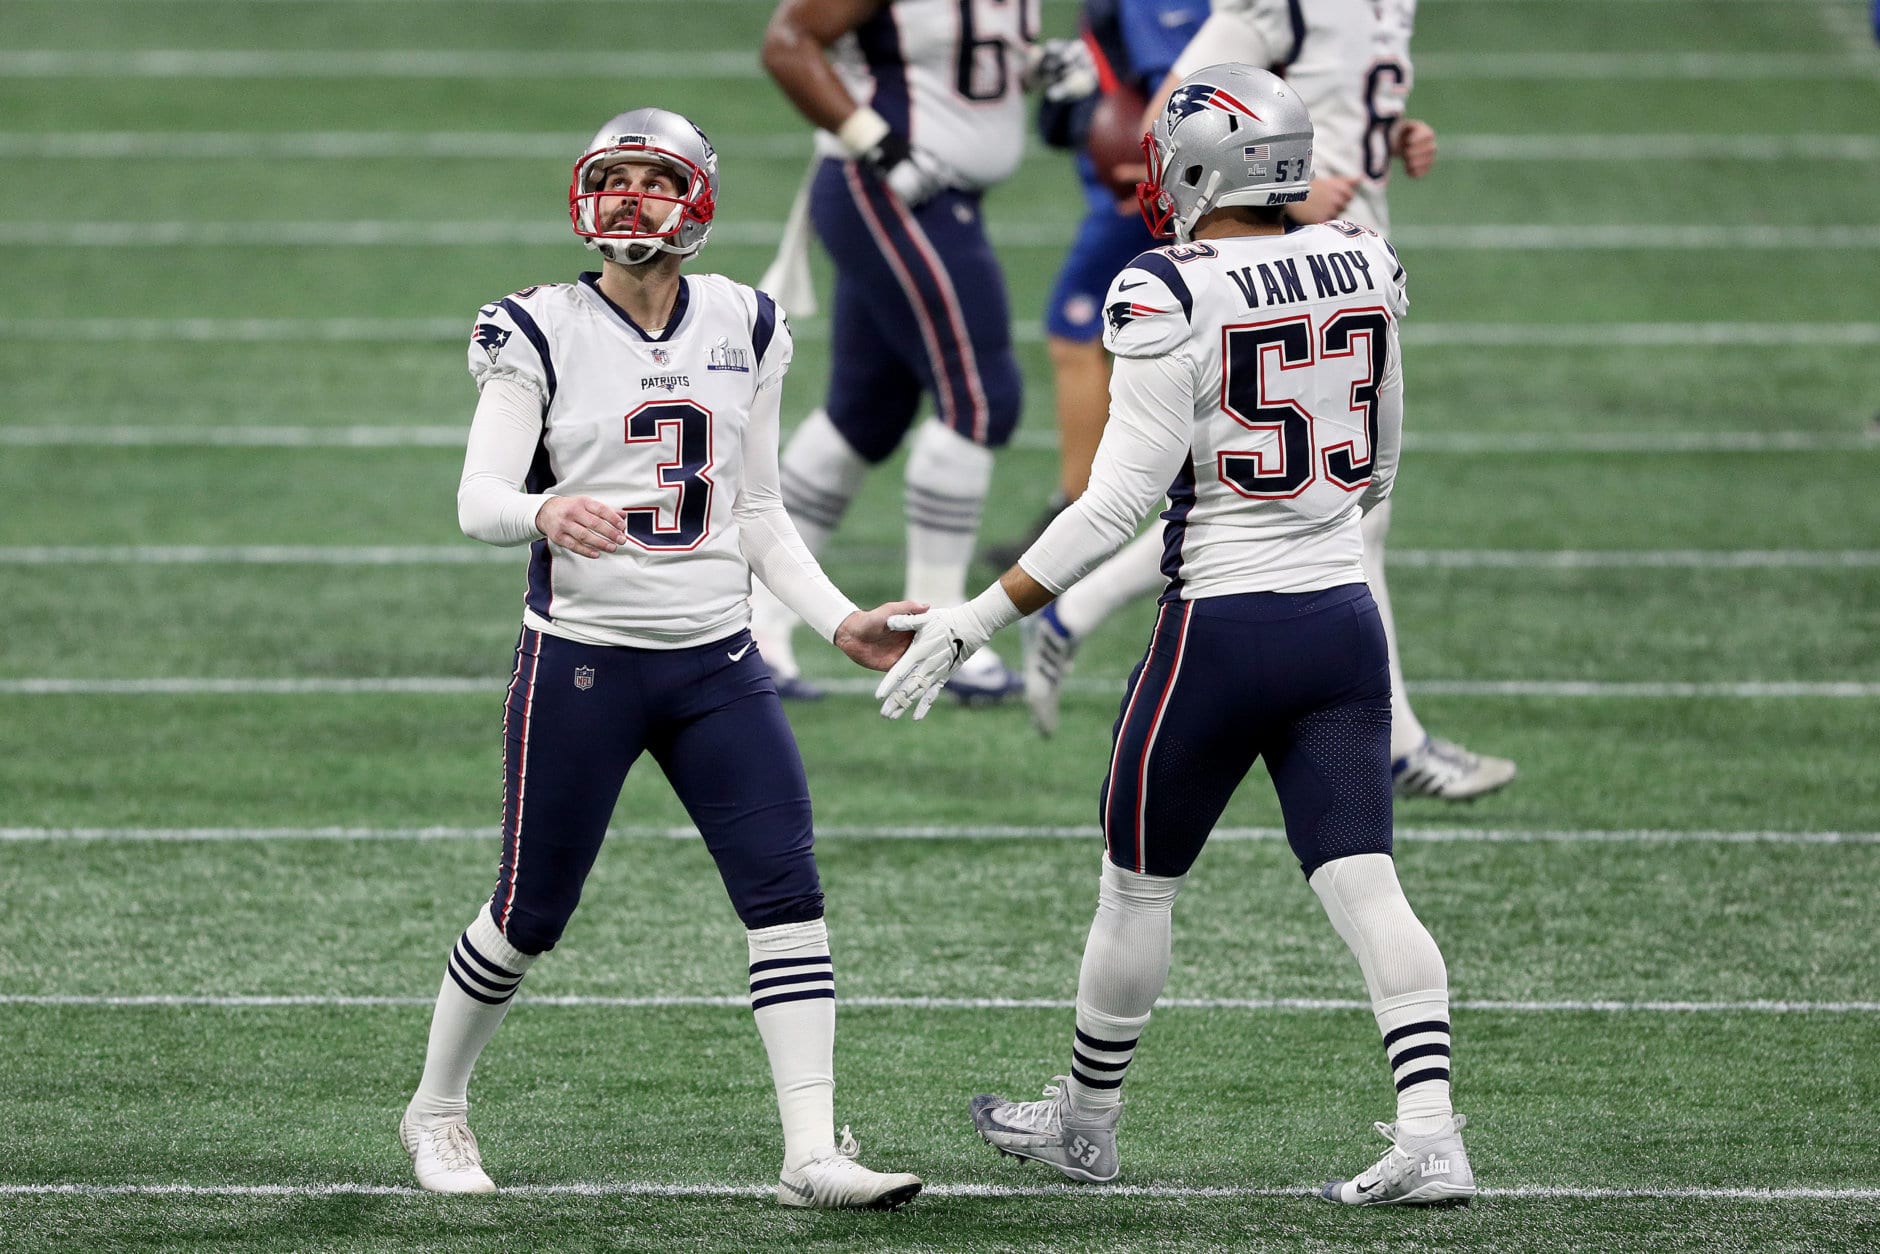 ATLANTA, GEORGIA - FEBRUARY 03:  Kyle Van Noy #53 congratulates Stephen Gostkowski #3 of the New England Patriots after his second quarter field goal against the Los Angeles Rams during Super Bowl LIII at Mercedes-Benz Stadium on February 03, 2019 in Atlanta, Georgia. (Photo by Patrick Smith/Getty Images)